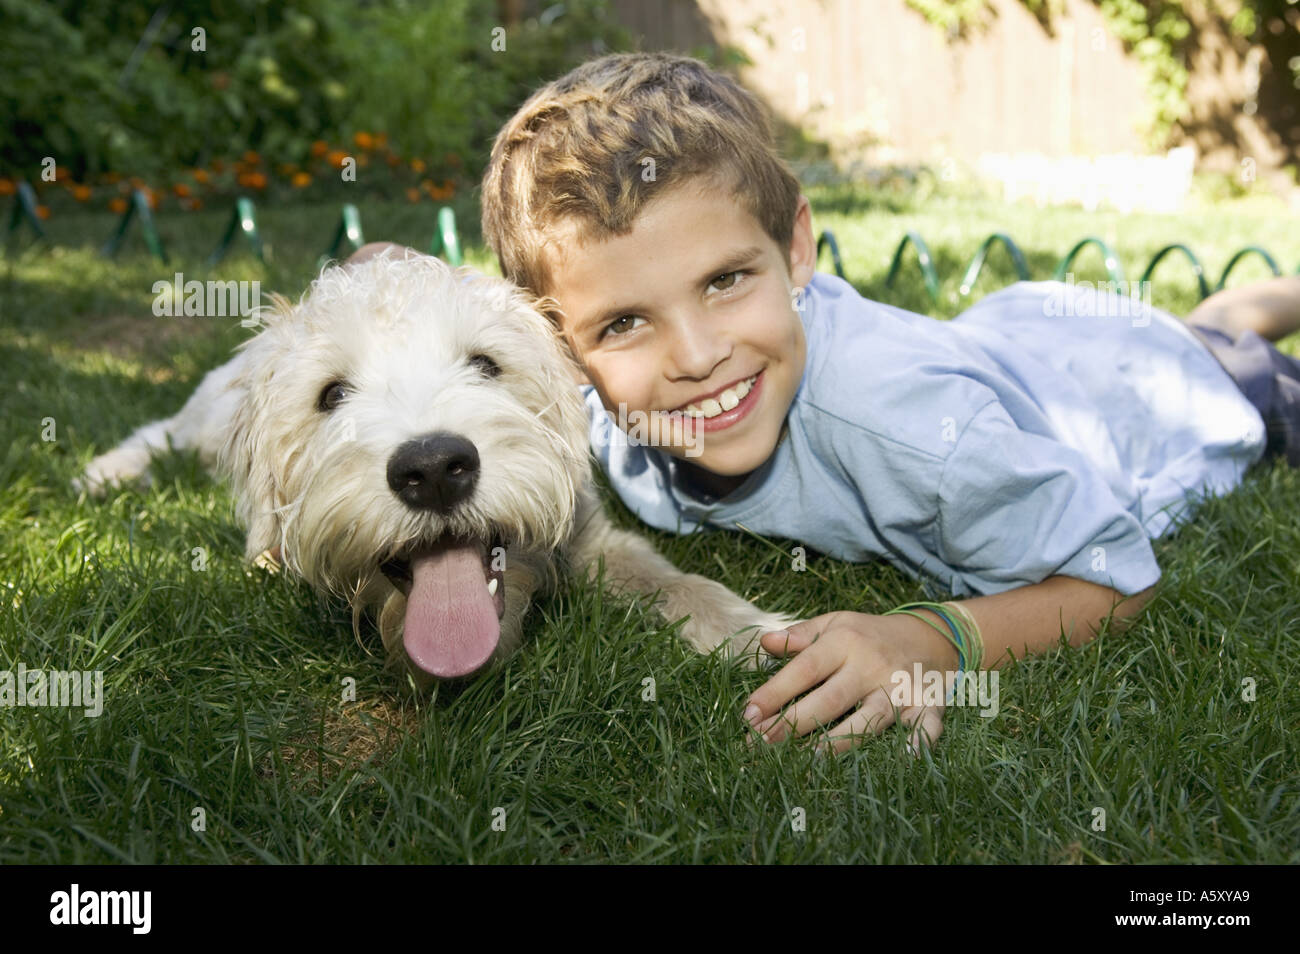 Boy and dog lying down together outdoors Stock Photo